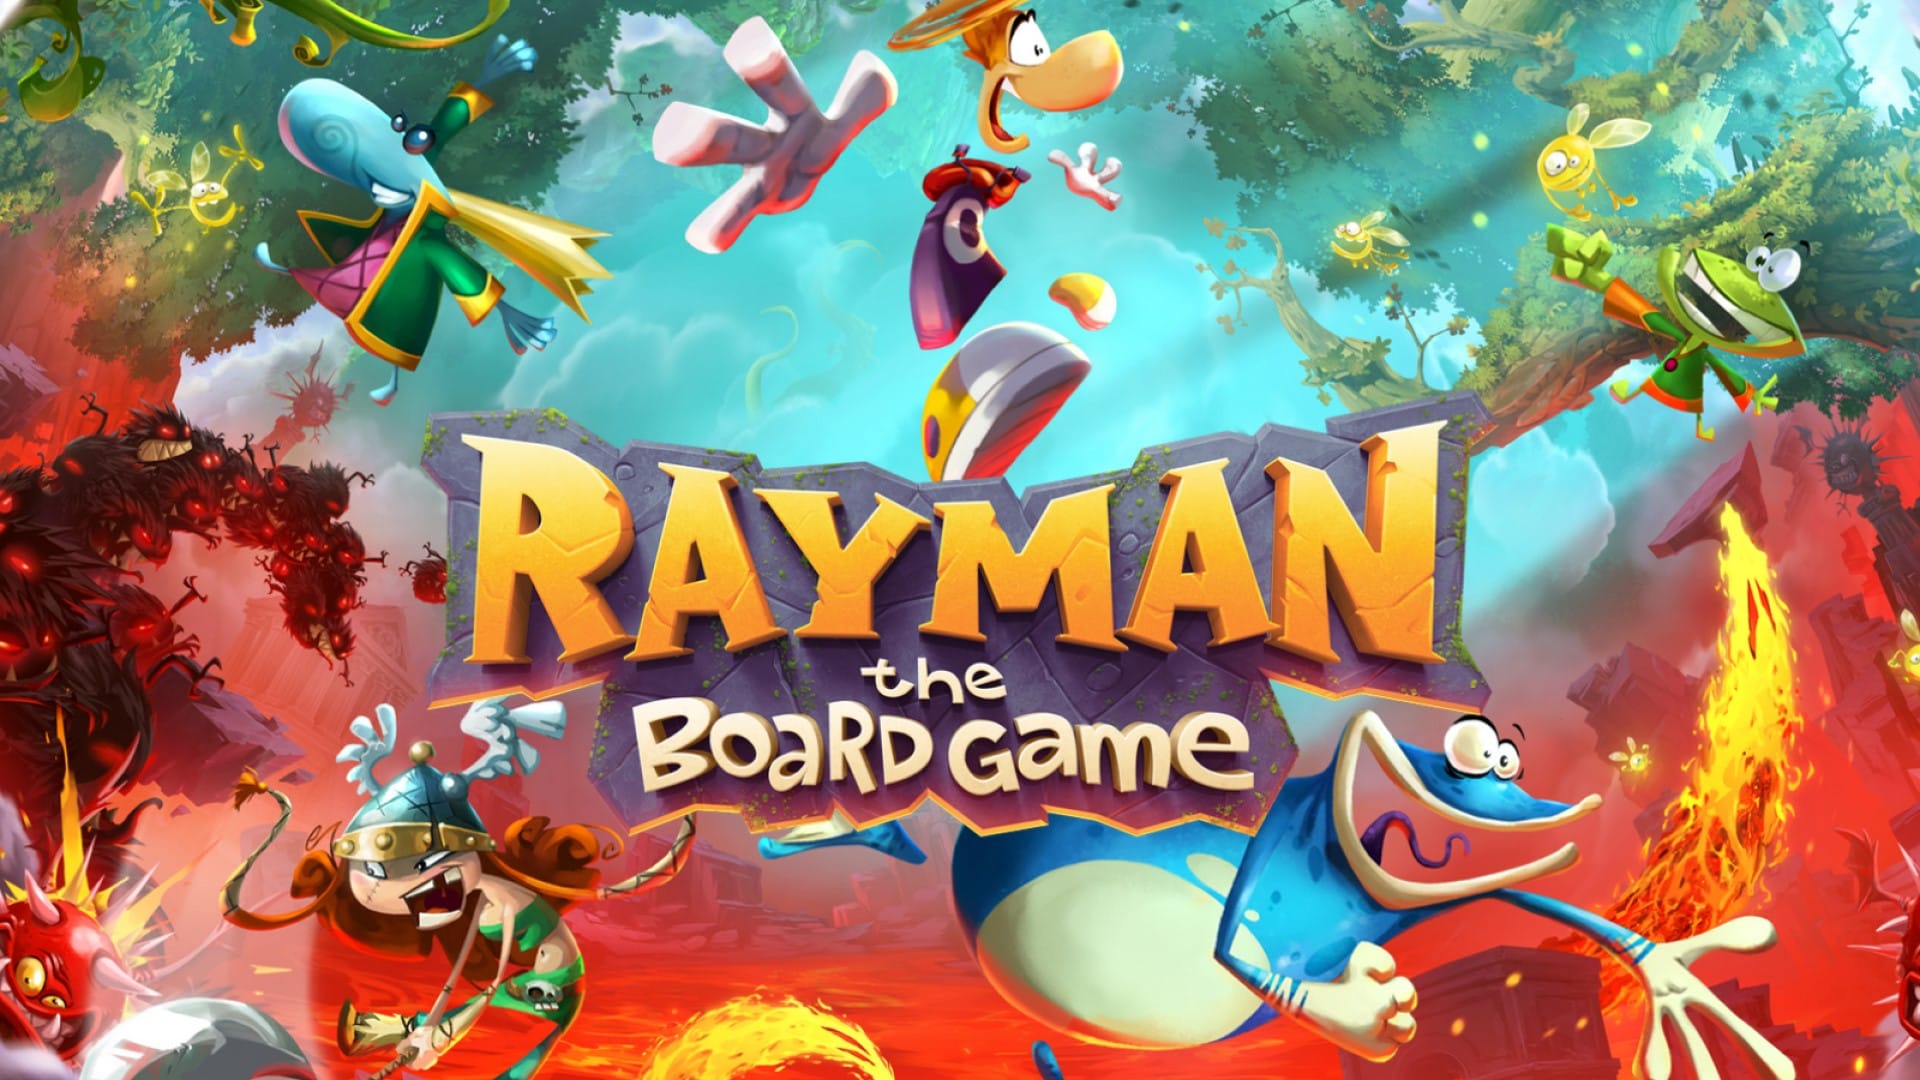 A promotional image of Rayman The Board Game, showing a splash page of Rayman, Globox, and Barbera surrounded by monsters and Teensies.